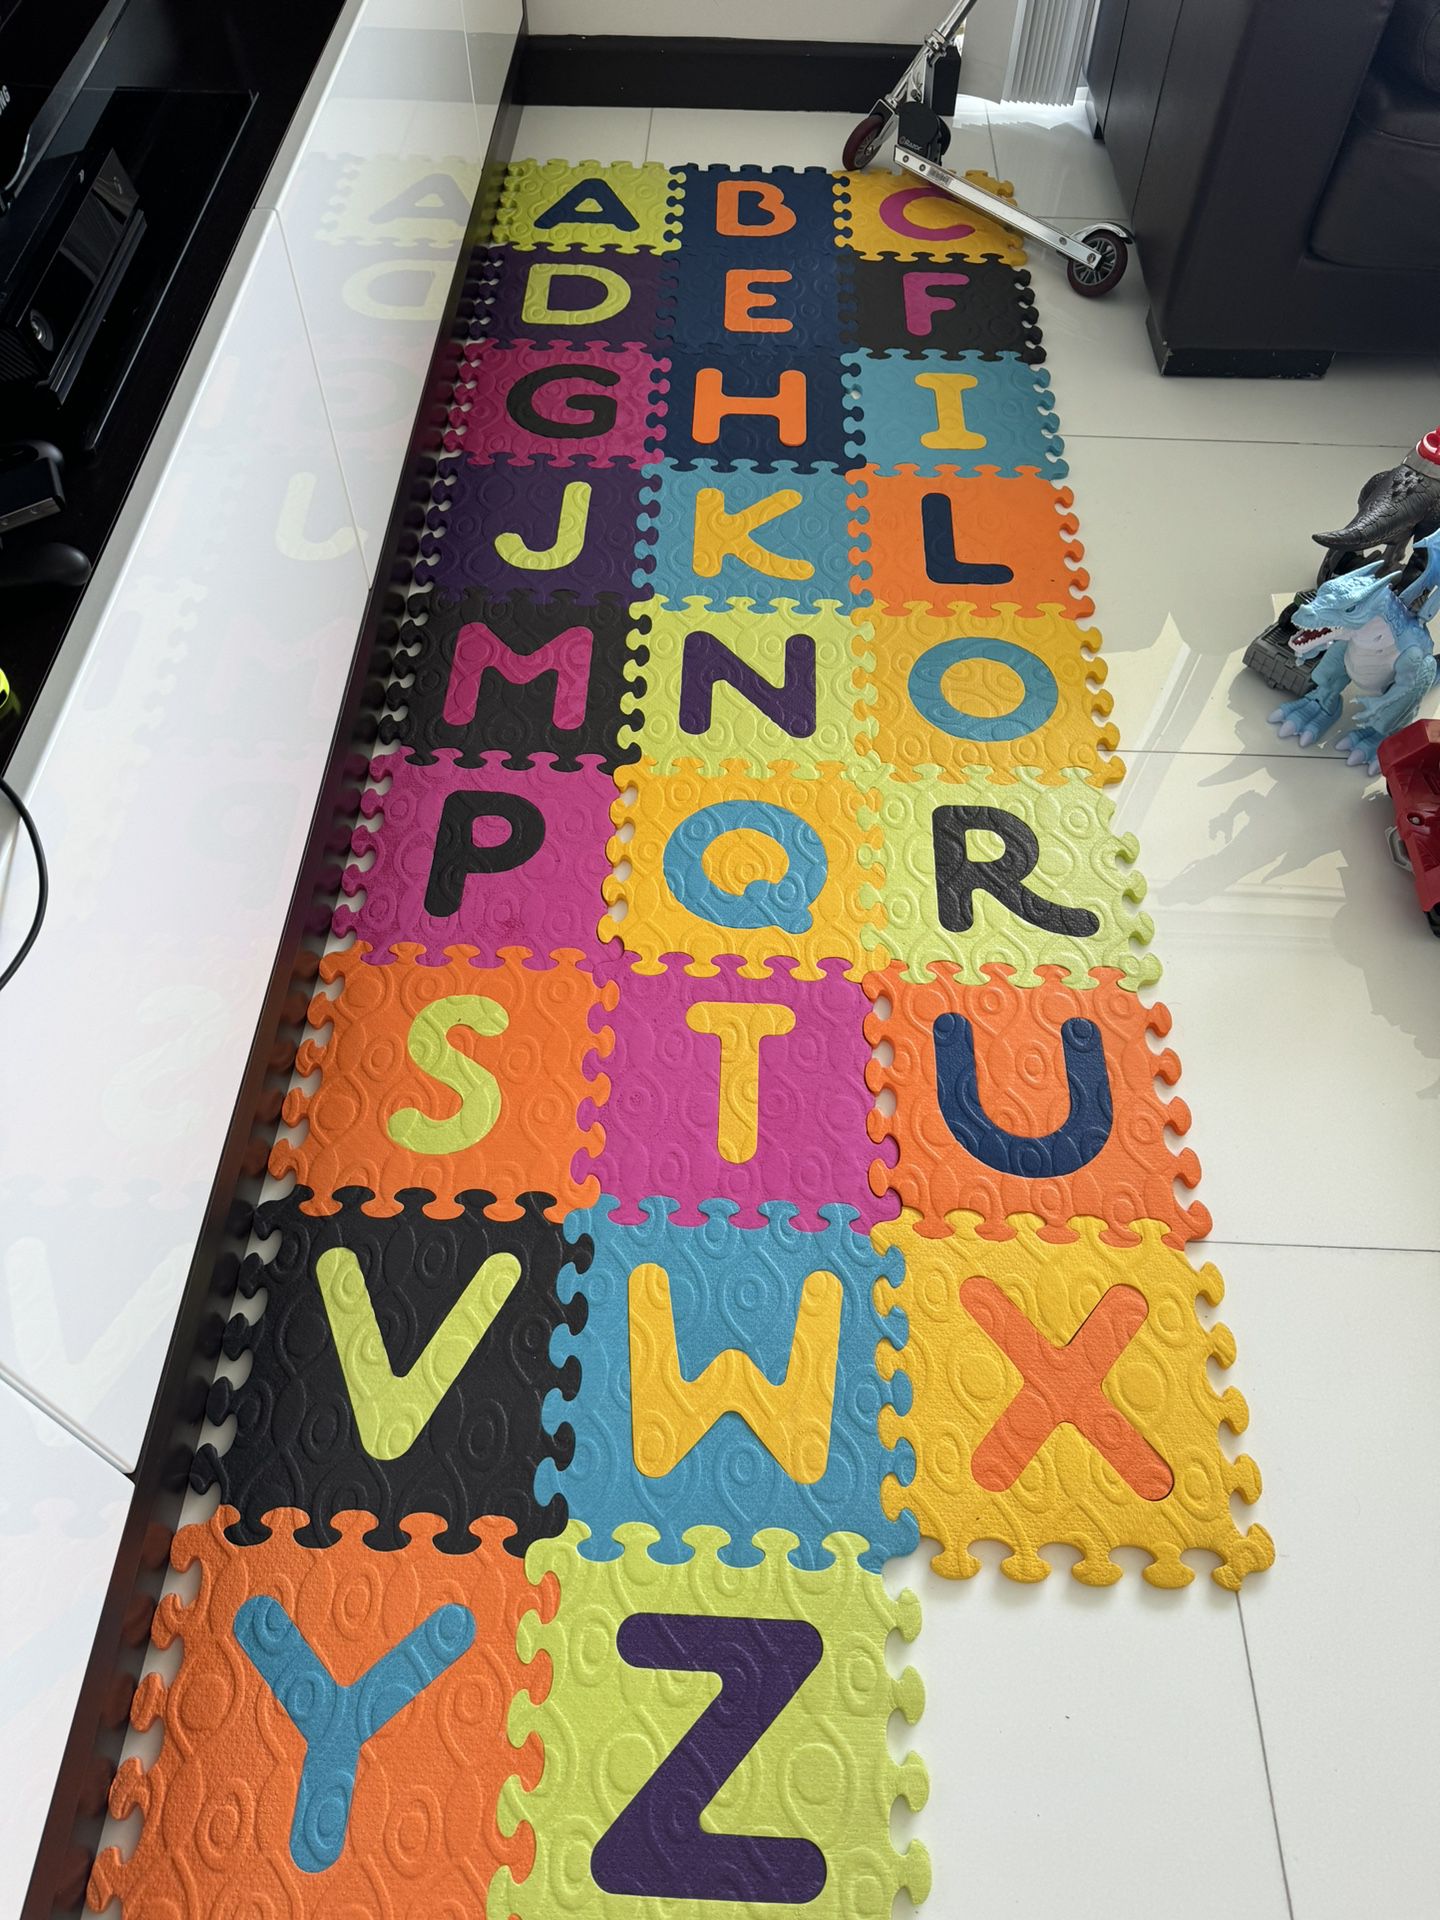 Carpet Letters For Toddlers 